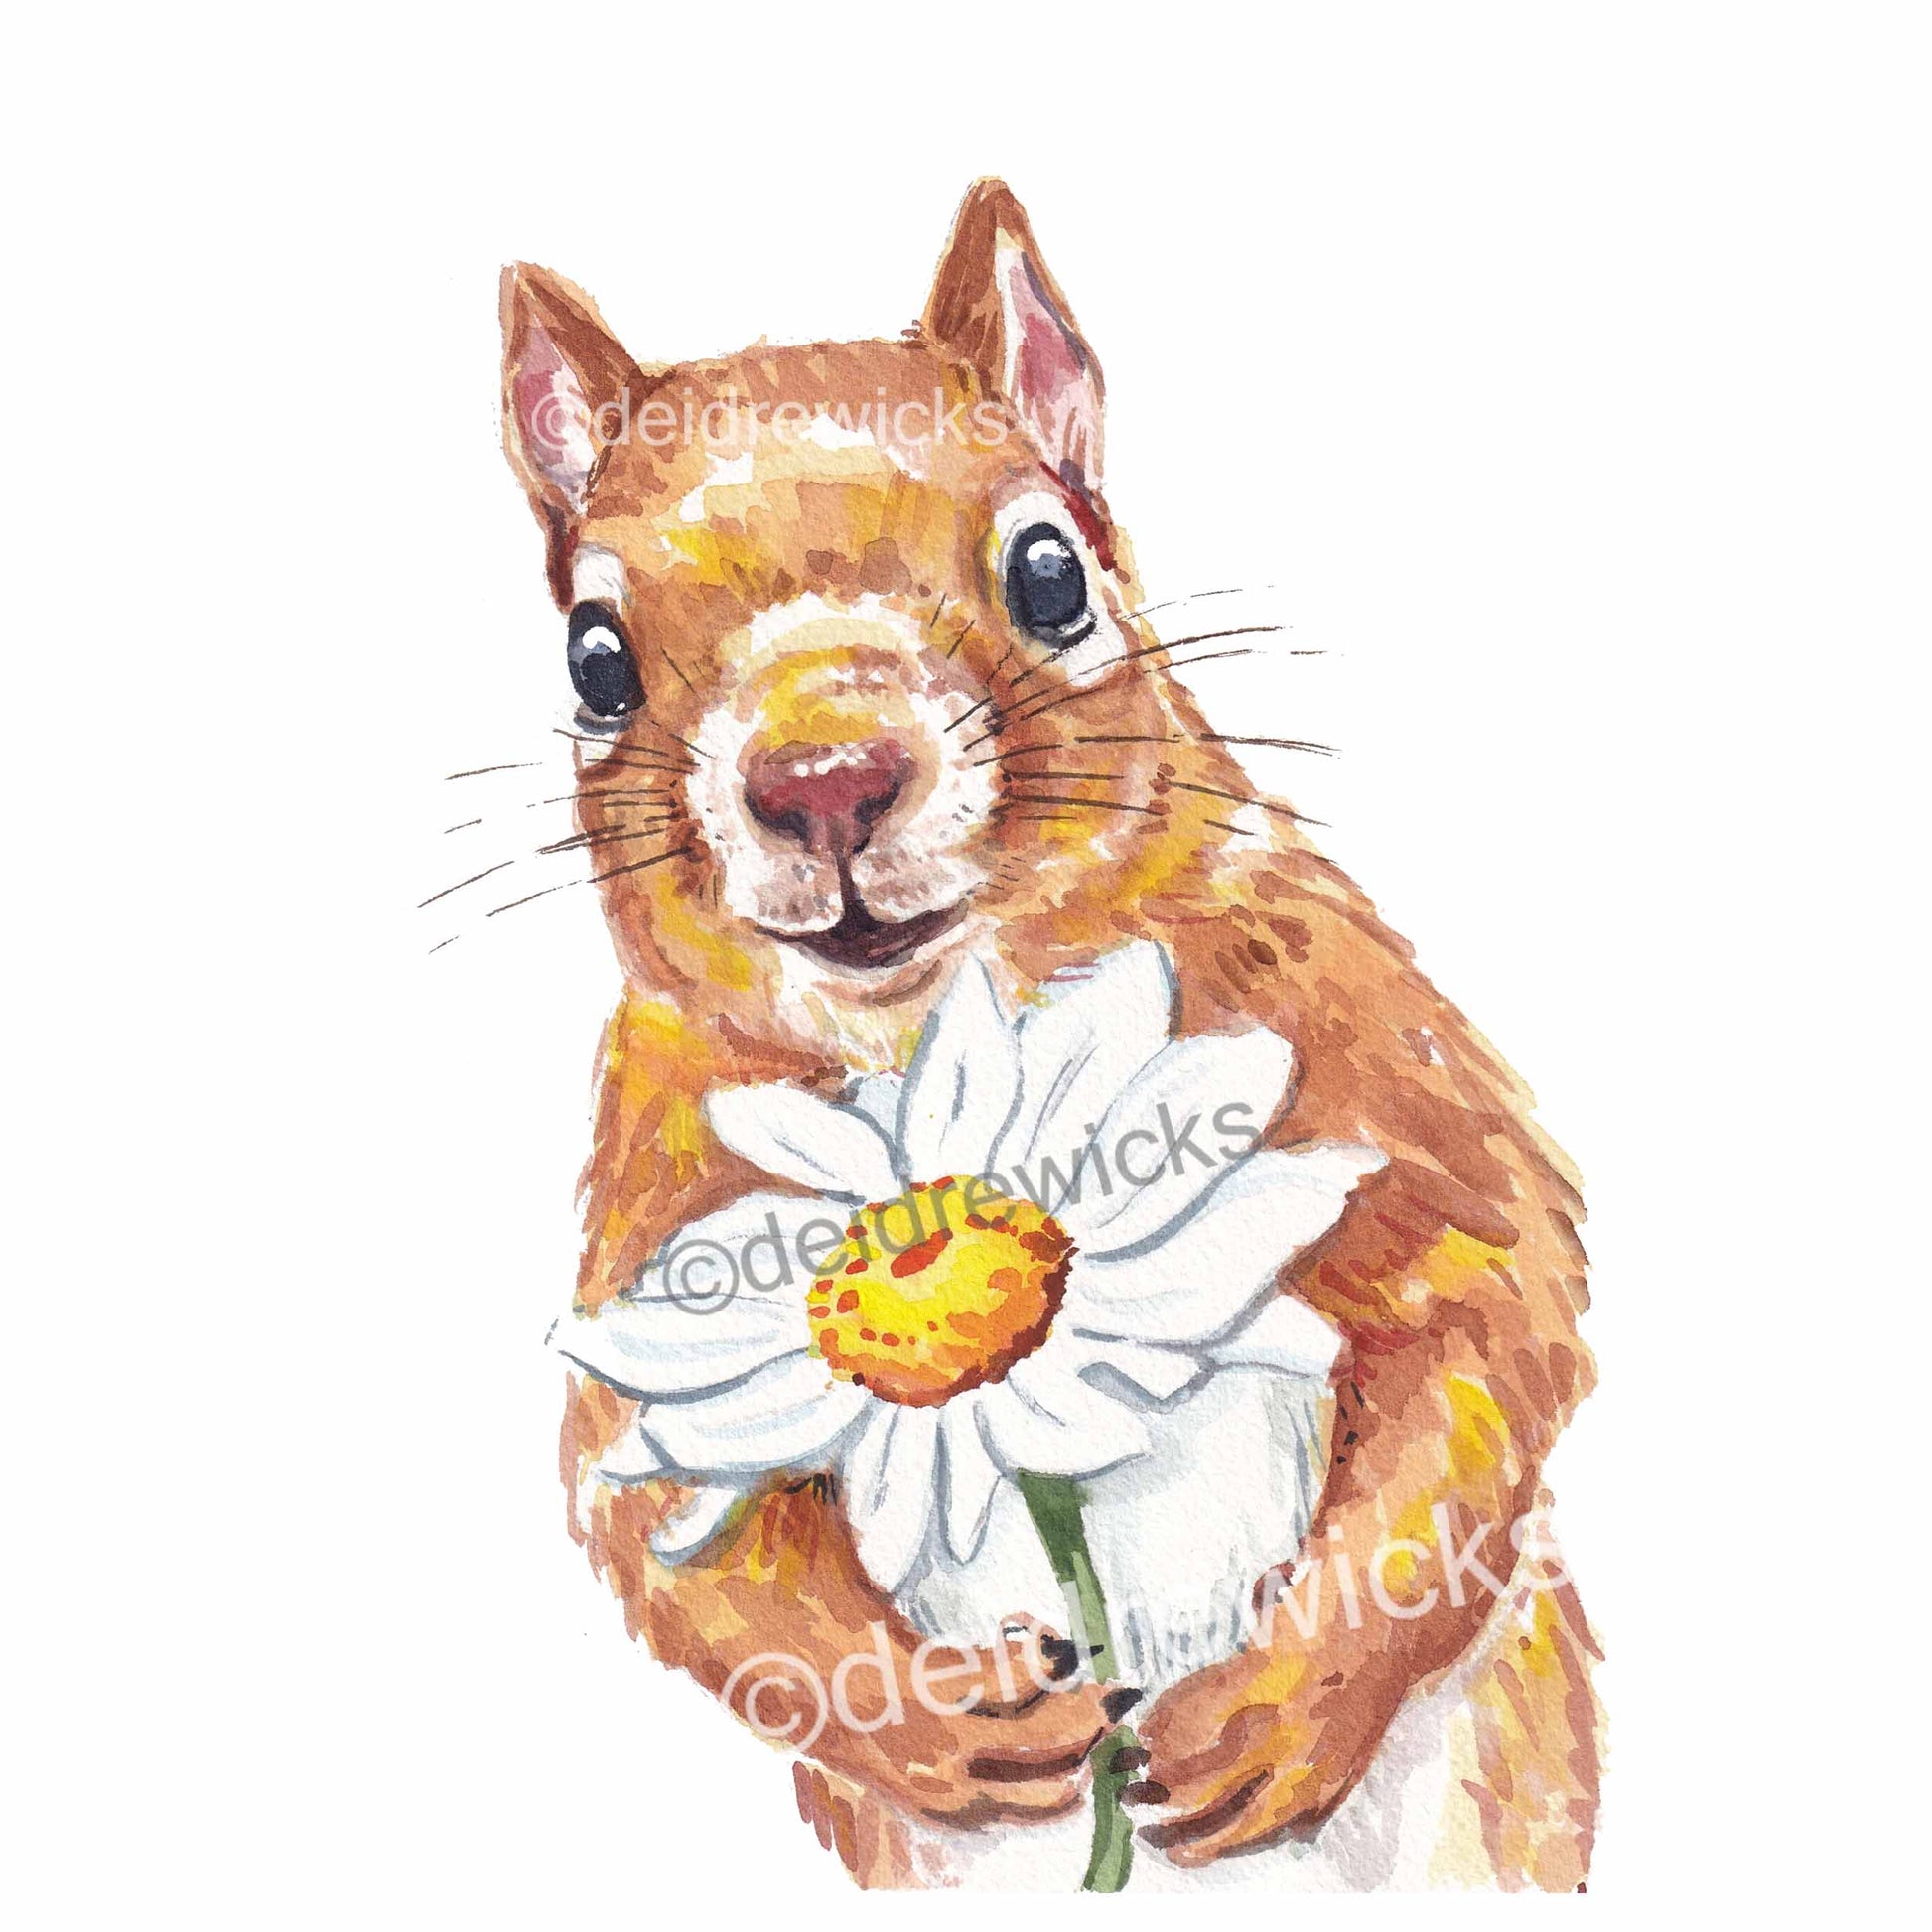 Watercolour painting of a red squirrel holding a daisy flower by artist Deidre Wicks